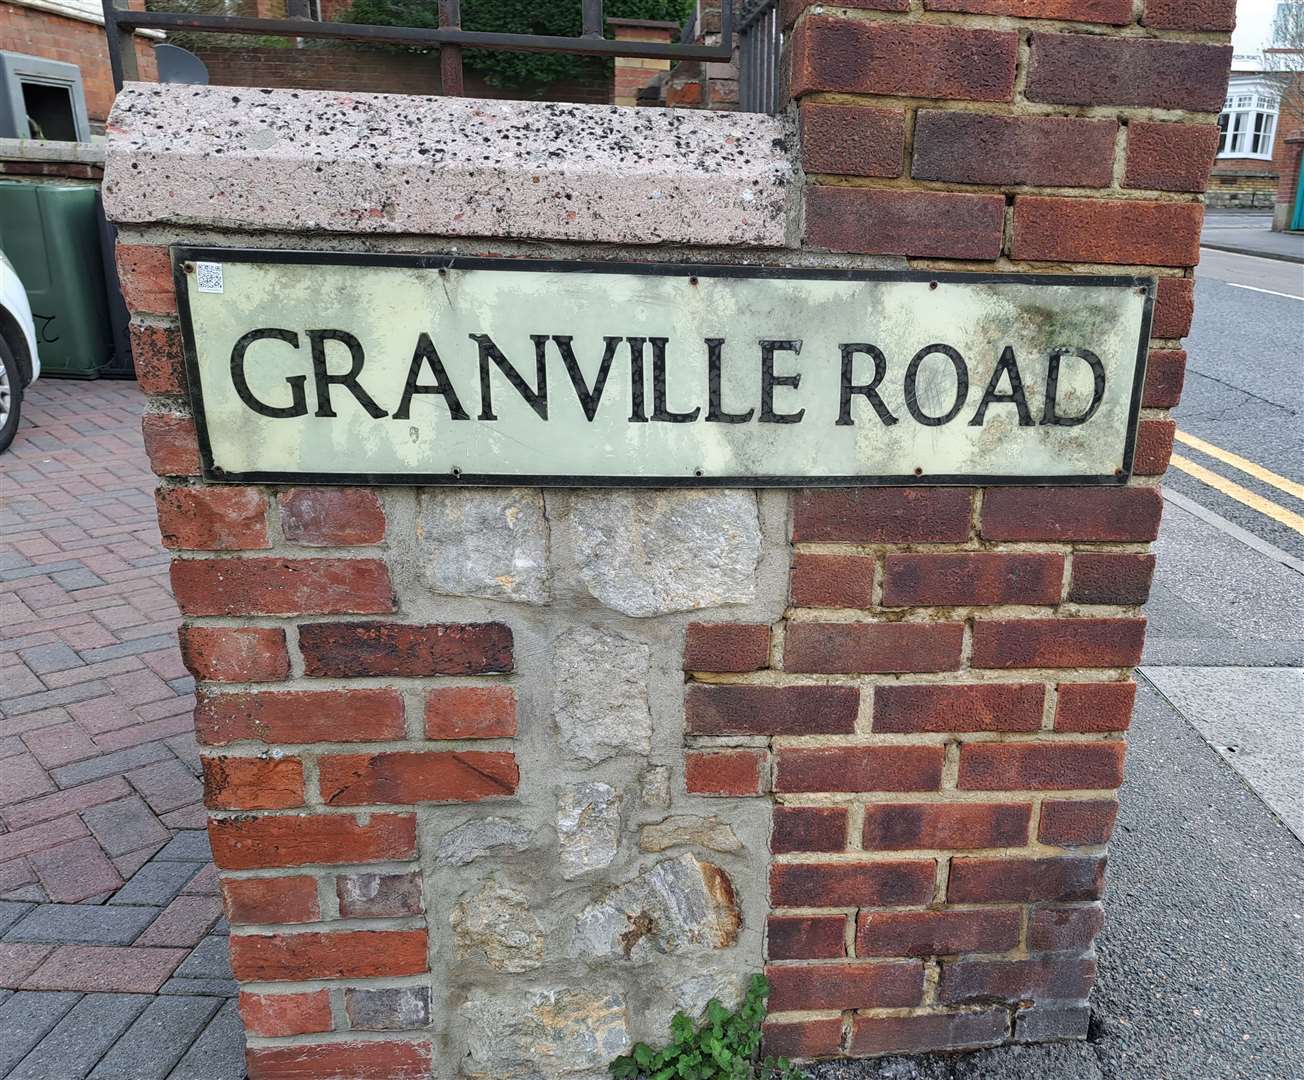 The council is buying in Granville Road